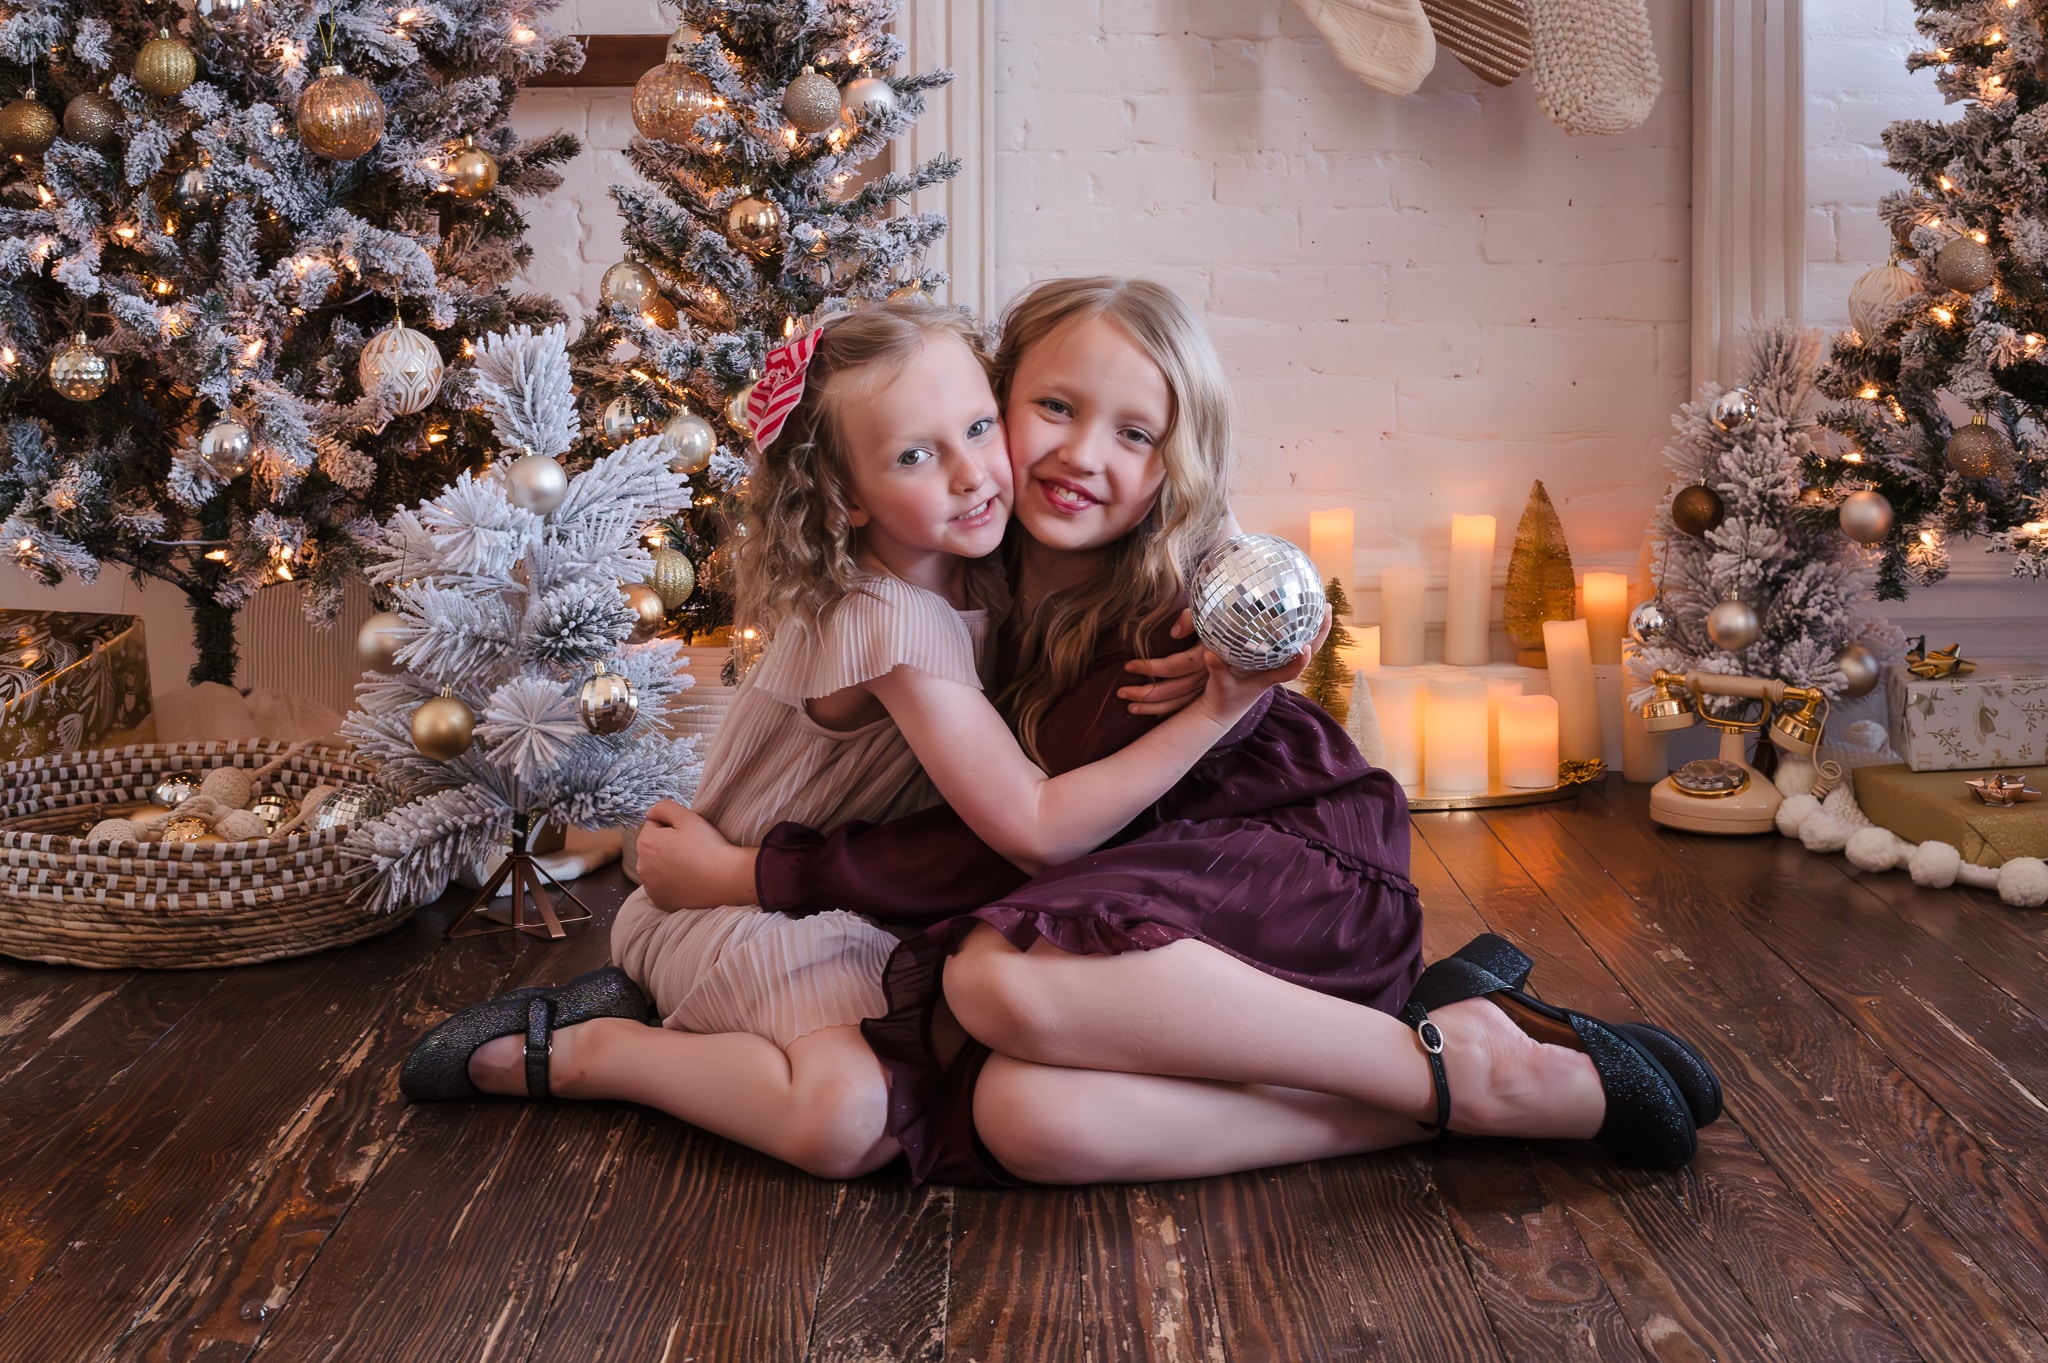 Holiday photo color schemes with jewel tones as shown on these two girls hugging make for a beautiful photo.